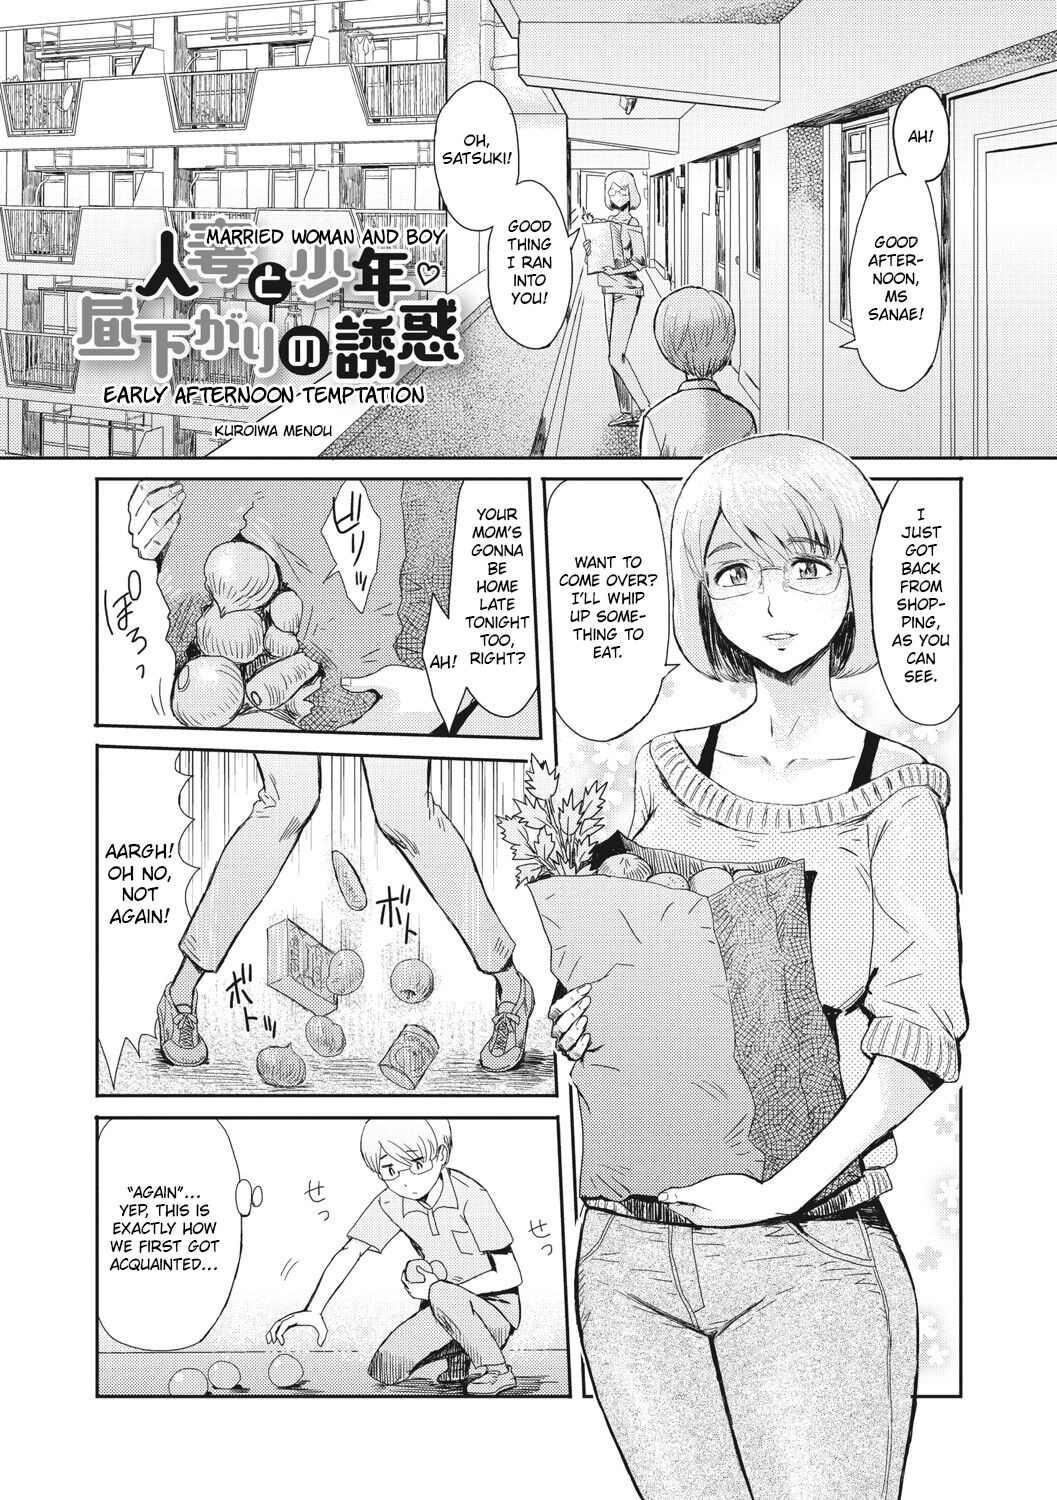 Married Woman and Boy Early Afternoon Temptation Kuroiwa Menou Porn Comic image